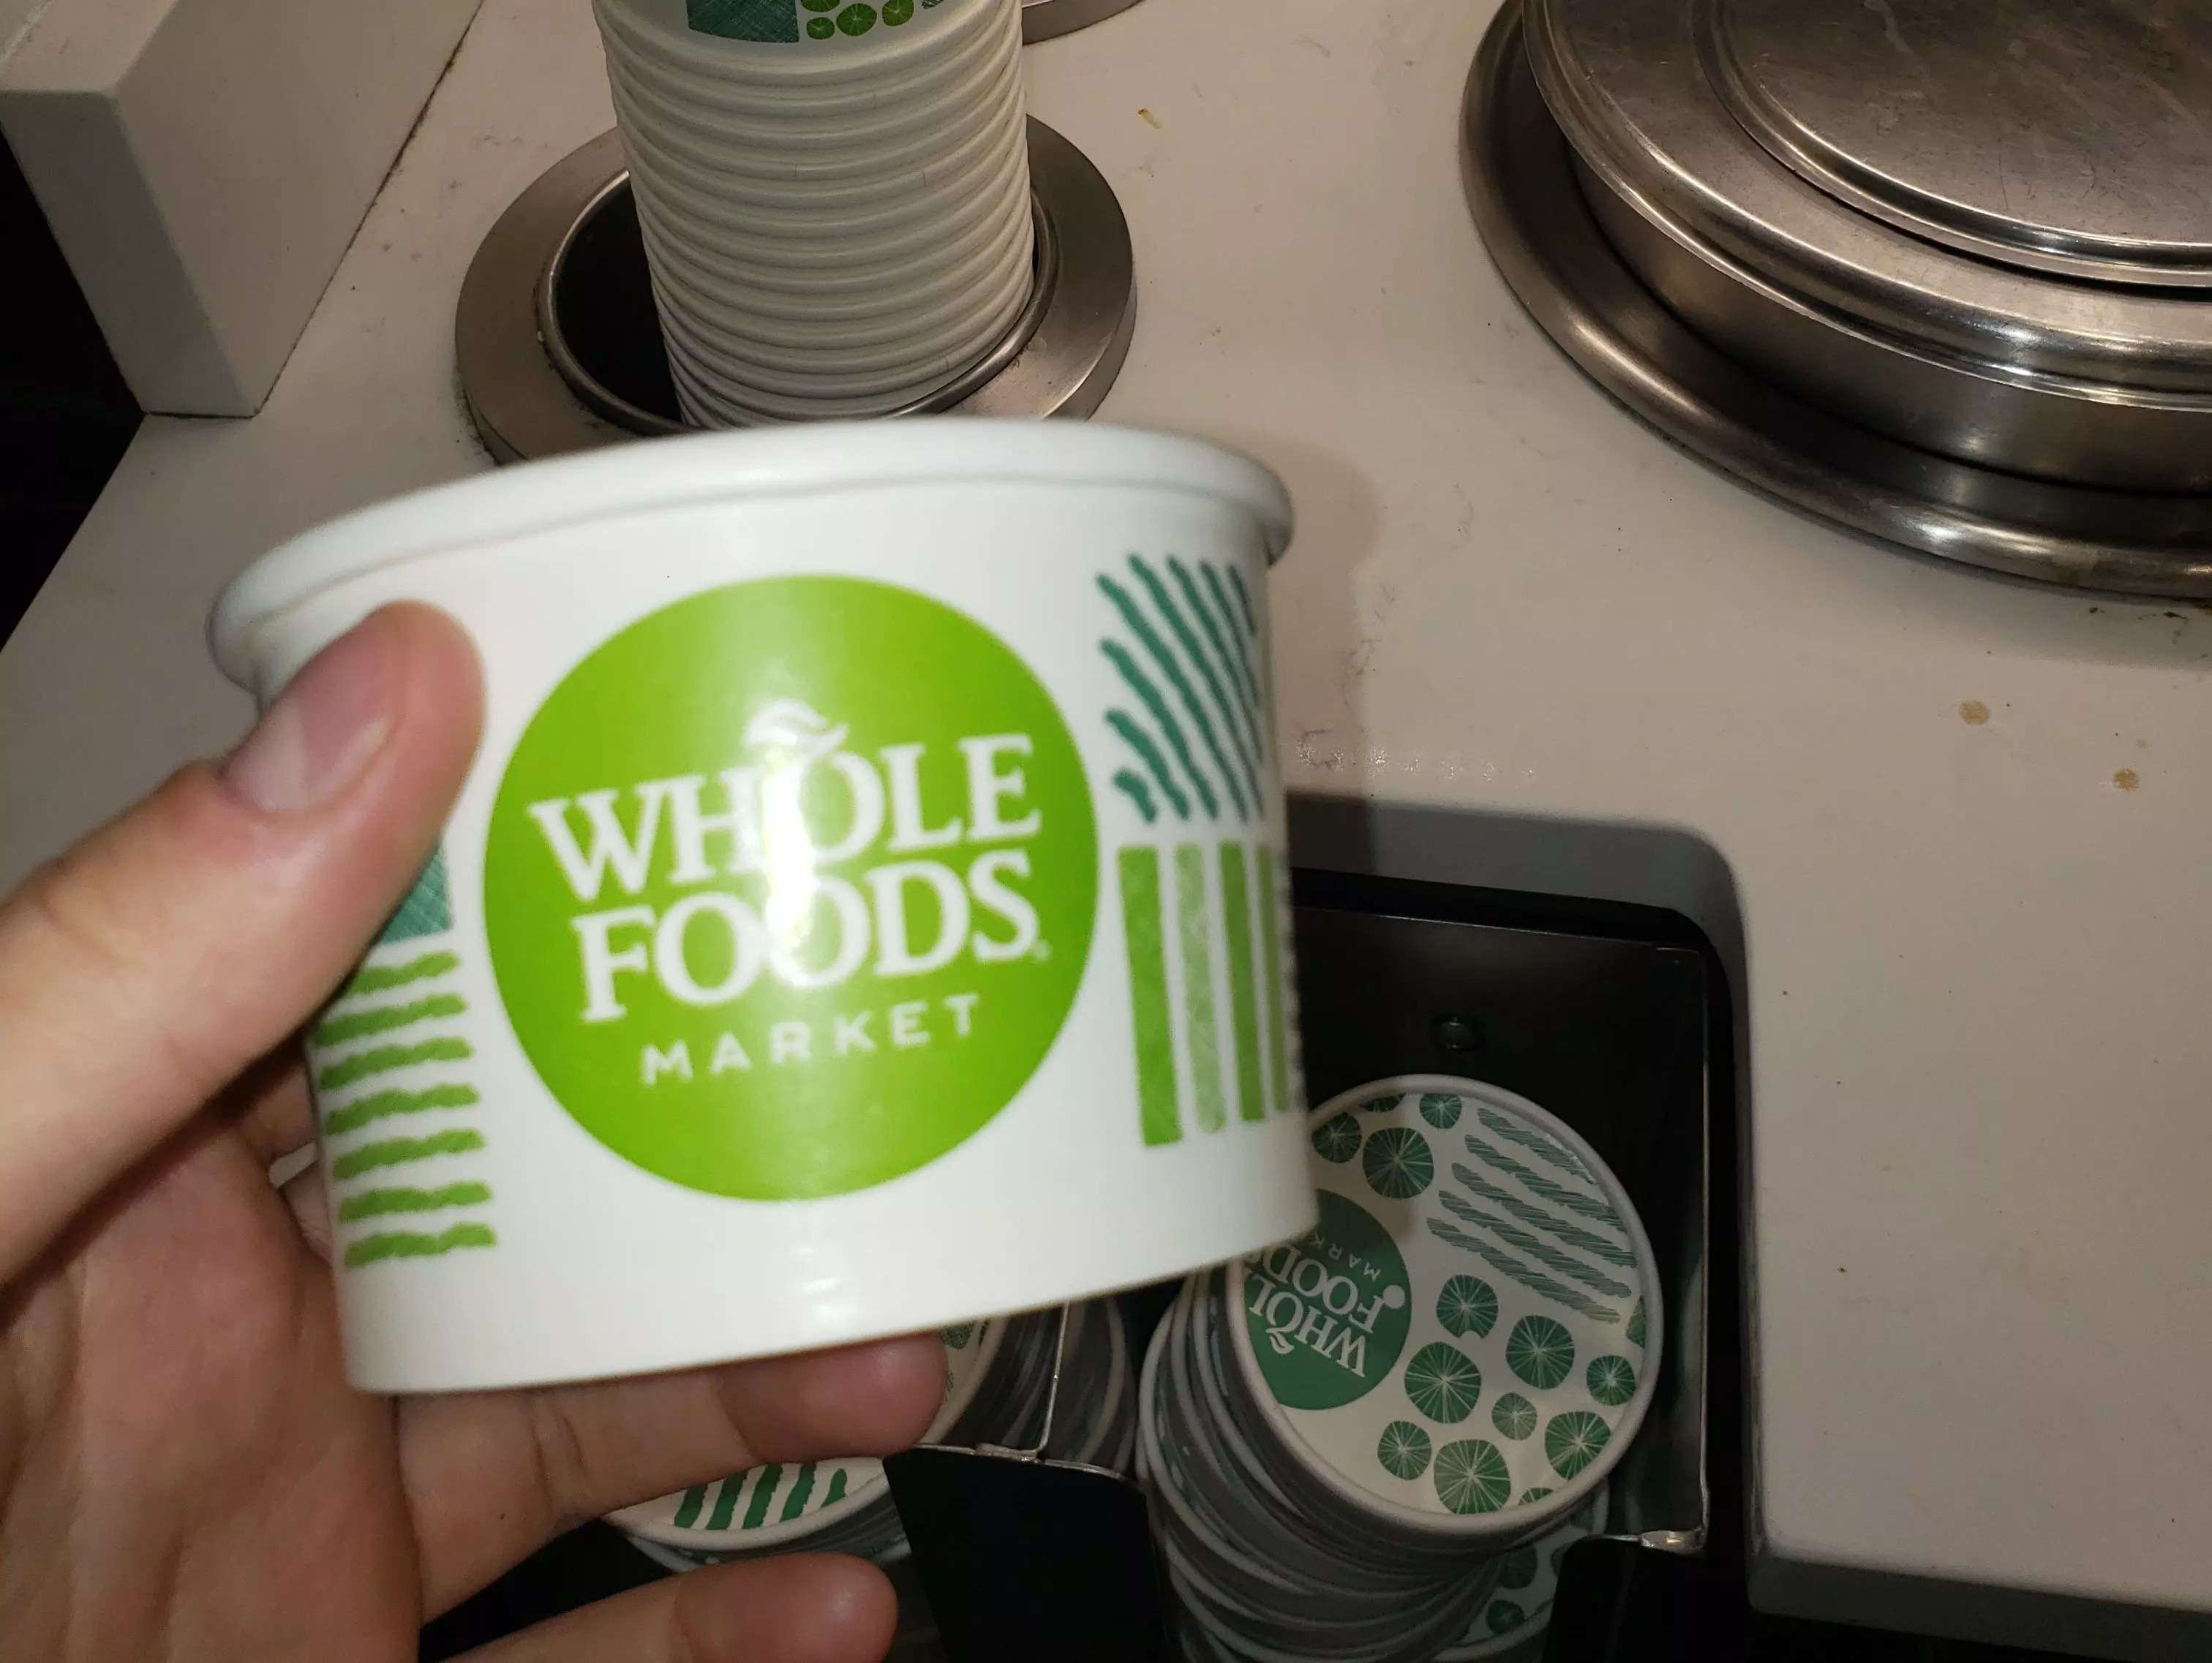 My hack for getting a healthy, filling meal from the Whole Foods food court  for less than $4